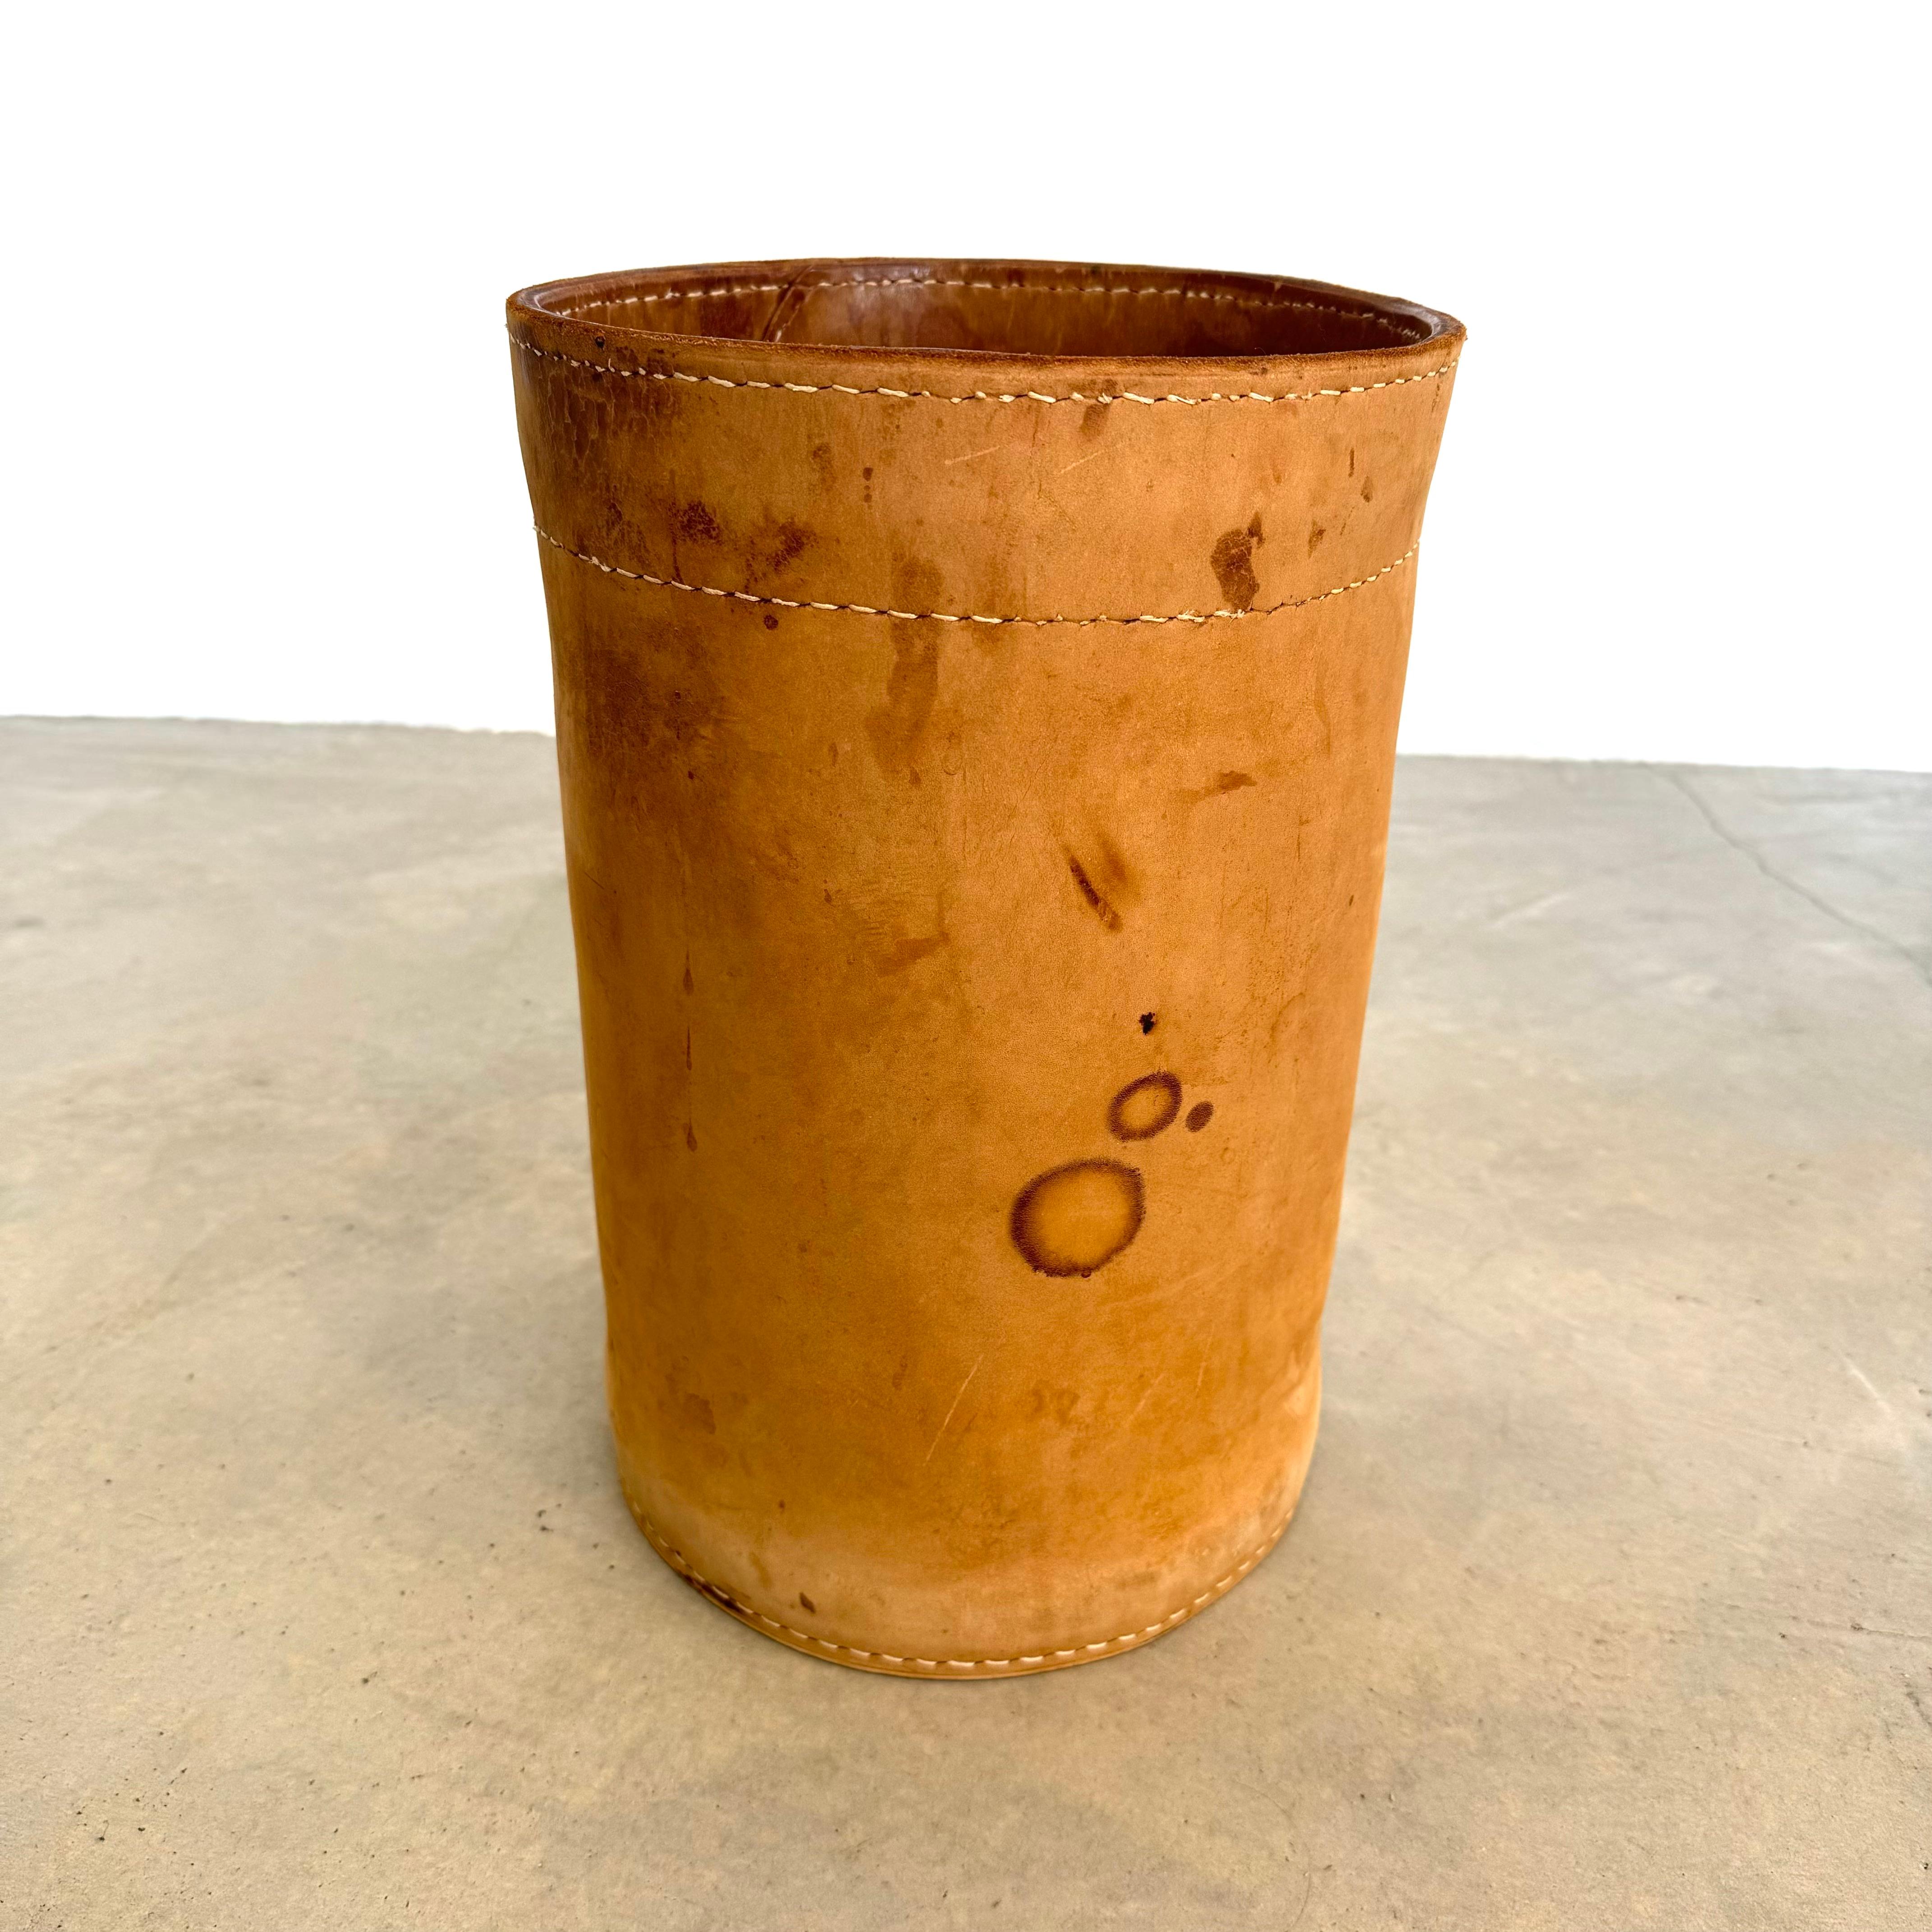 Handsome large saddle leather waste bin in the style of Jacques Adnet. Circa 1950s. Extremely thick cowhide with great nubuck finish. Wear as shown. Great patina. Good vintage condition. Priced individually.

In our Los Angeles showroom.